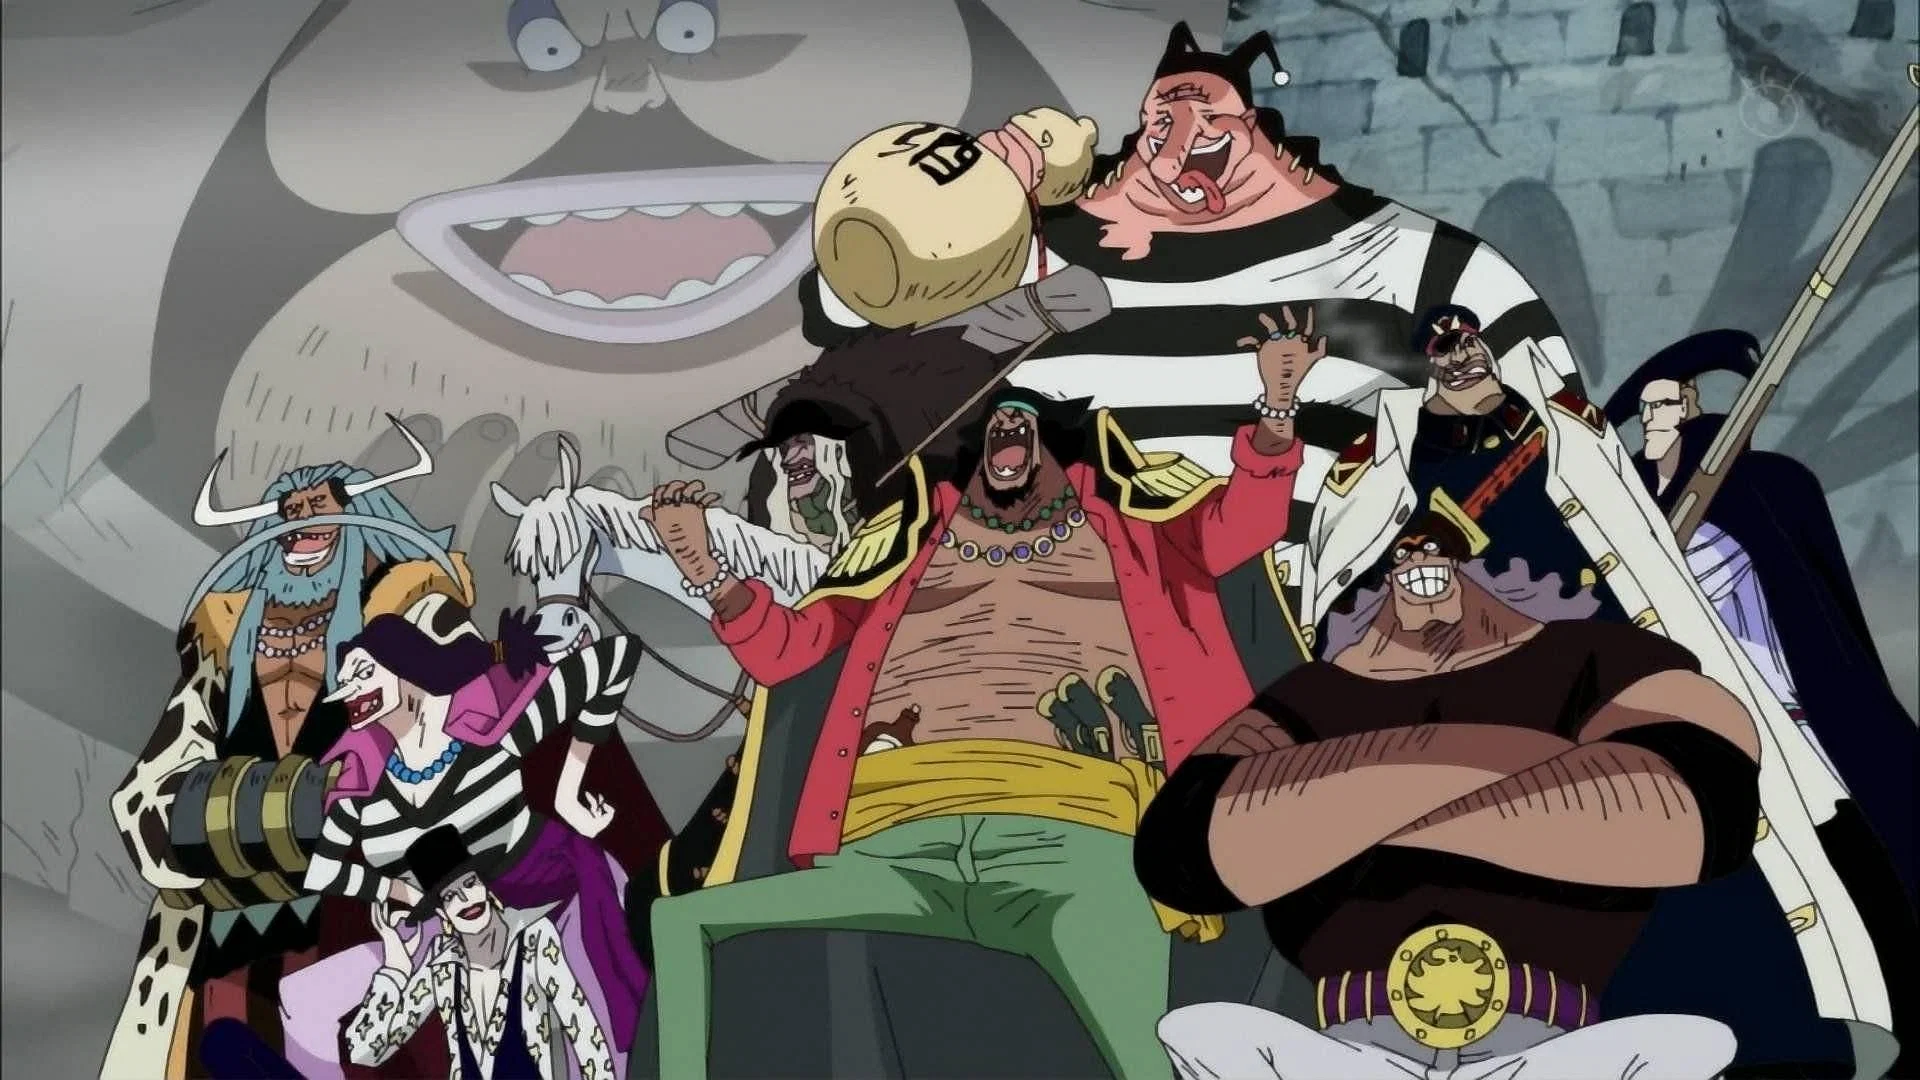 one piece chapter 1105: Release Date, Spoilers, Raw scans, where to watch?